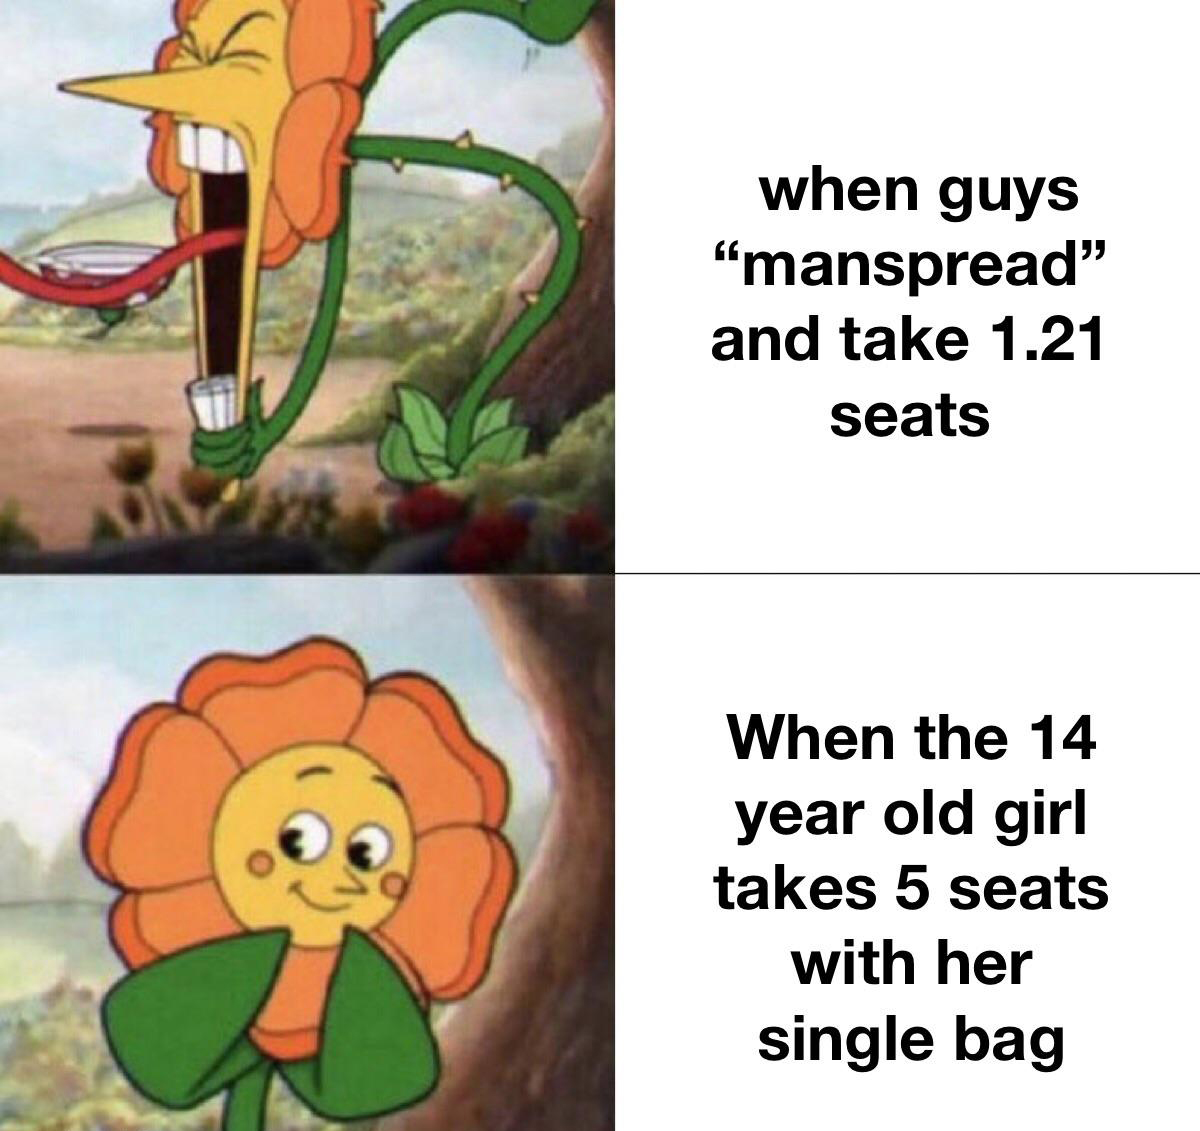 funny memes - hangry wife meme - when guys "manspread" and take 1.21 seats When the 14 year old girl takes 5 seats with her single bag